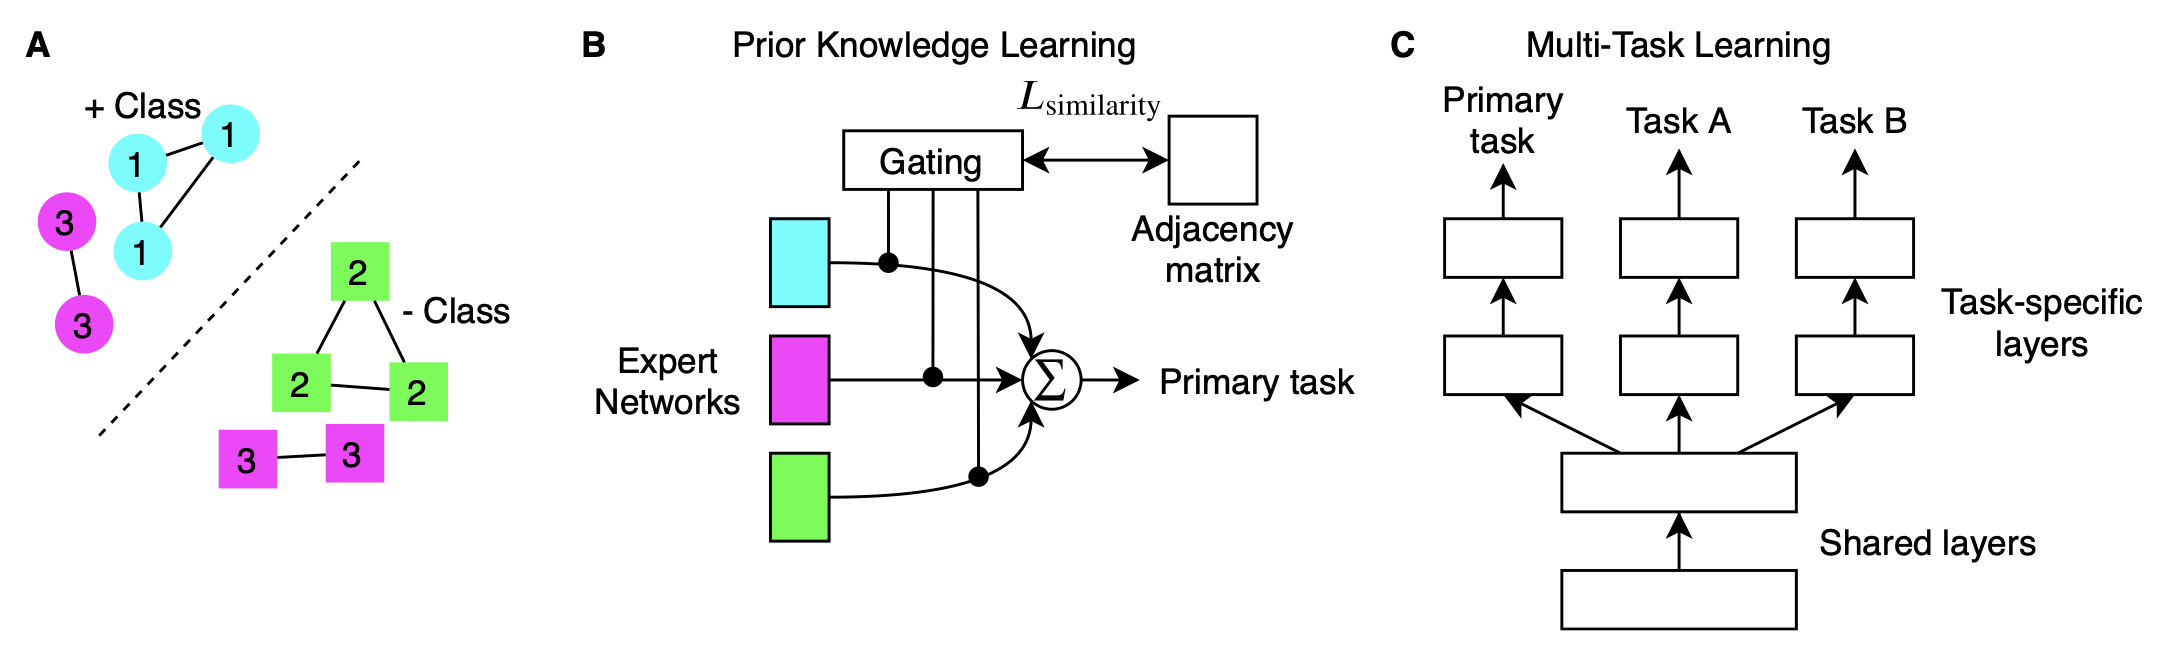 Prior knowledge learning